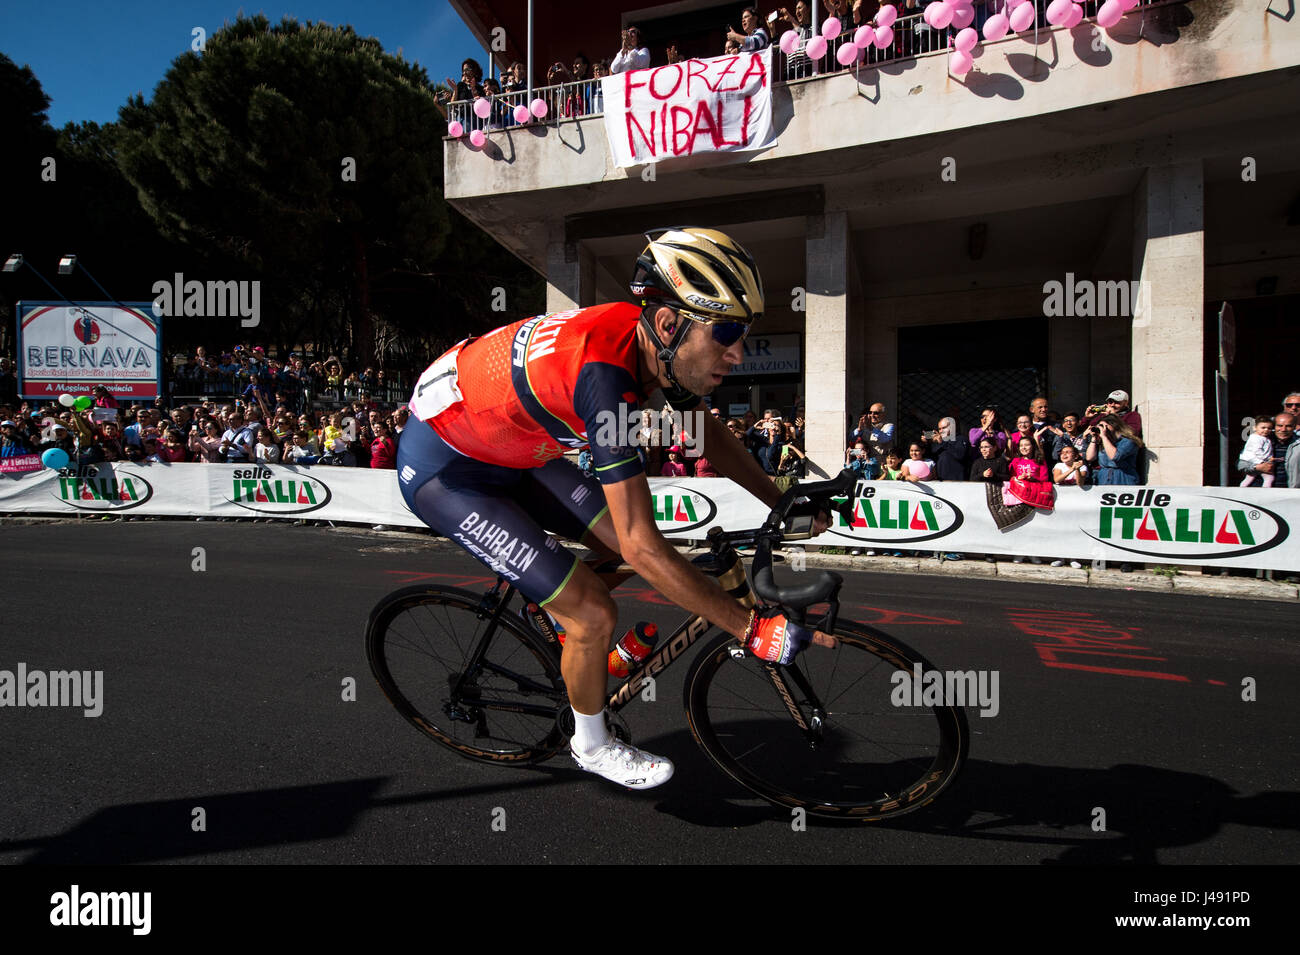 Messina, Italy. 10th May, 2017. Vincenzo Nibali during of stage 5 of the Giro d'Italia in Messina, Italy. Credit: Simon Gill/Alamy Live News Stock Photo